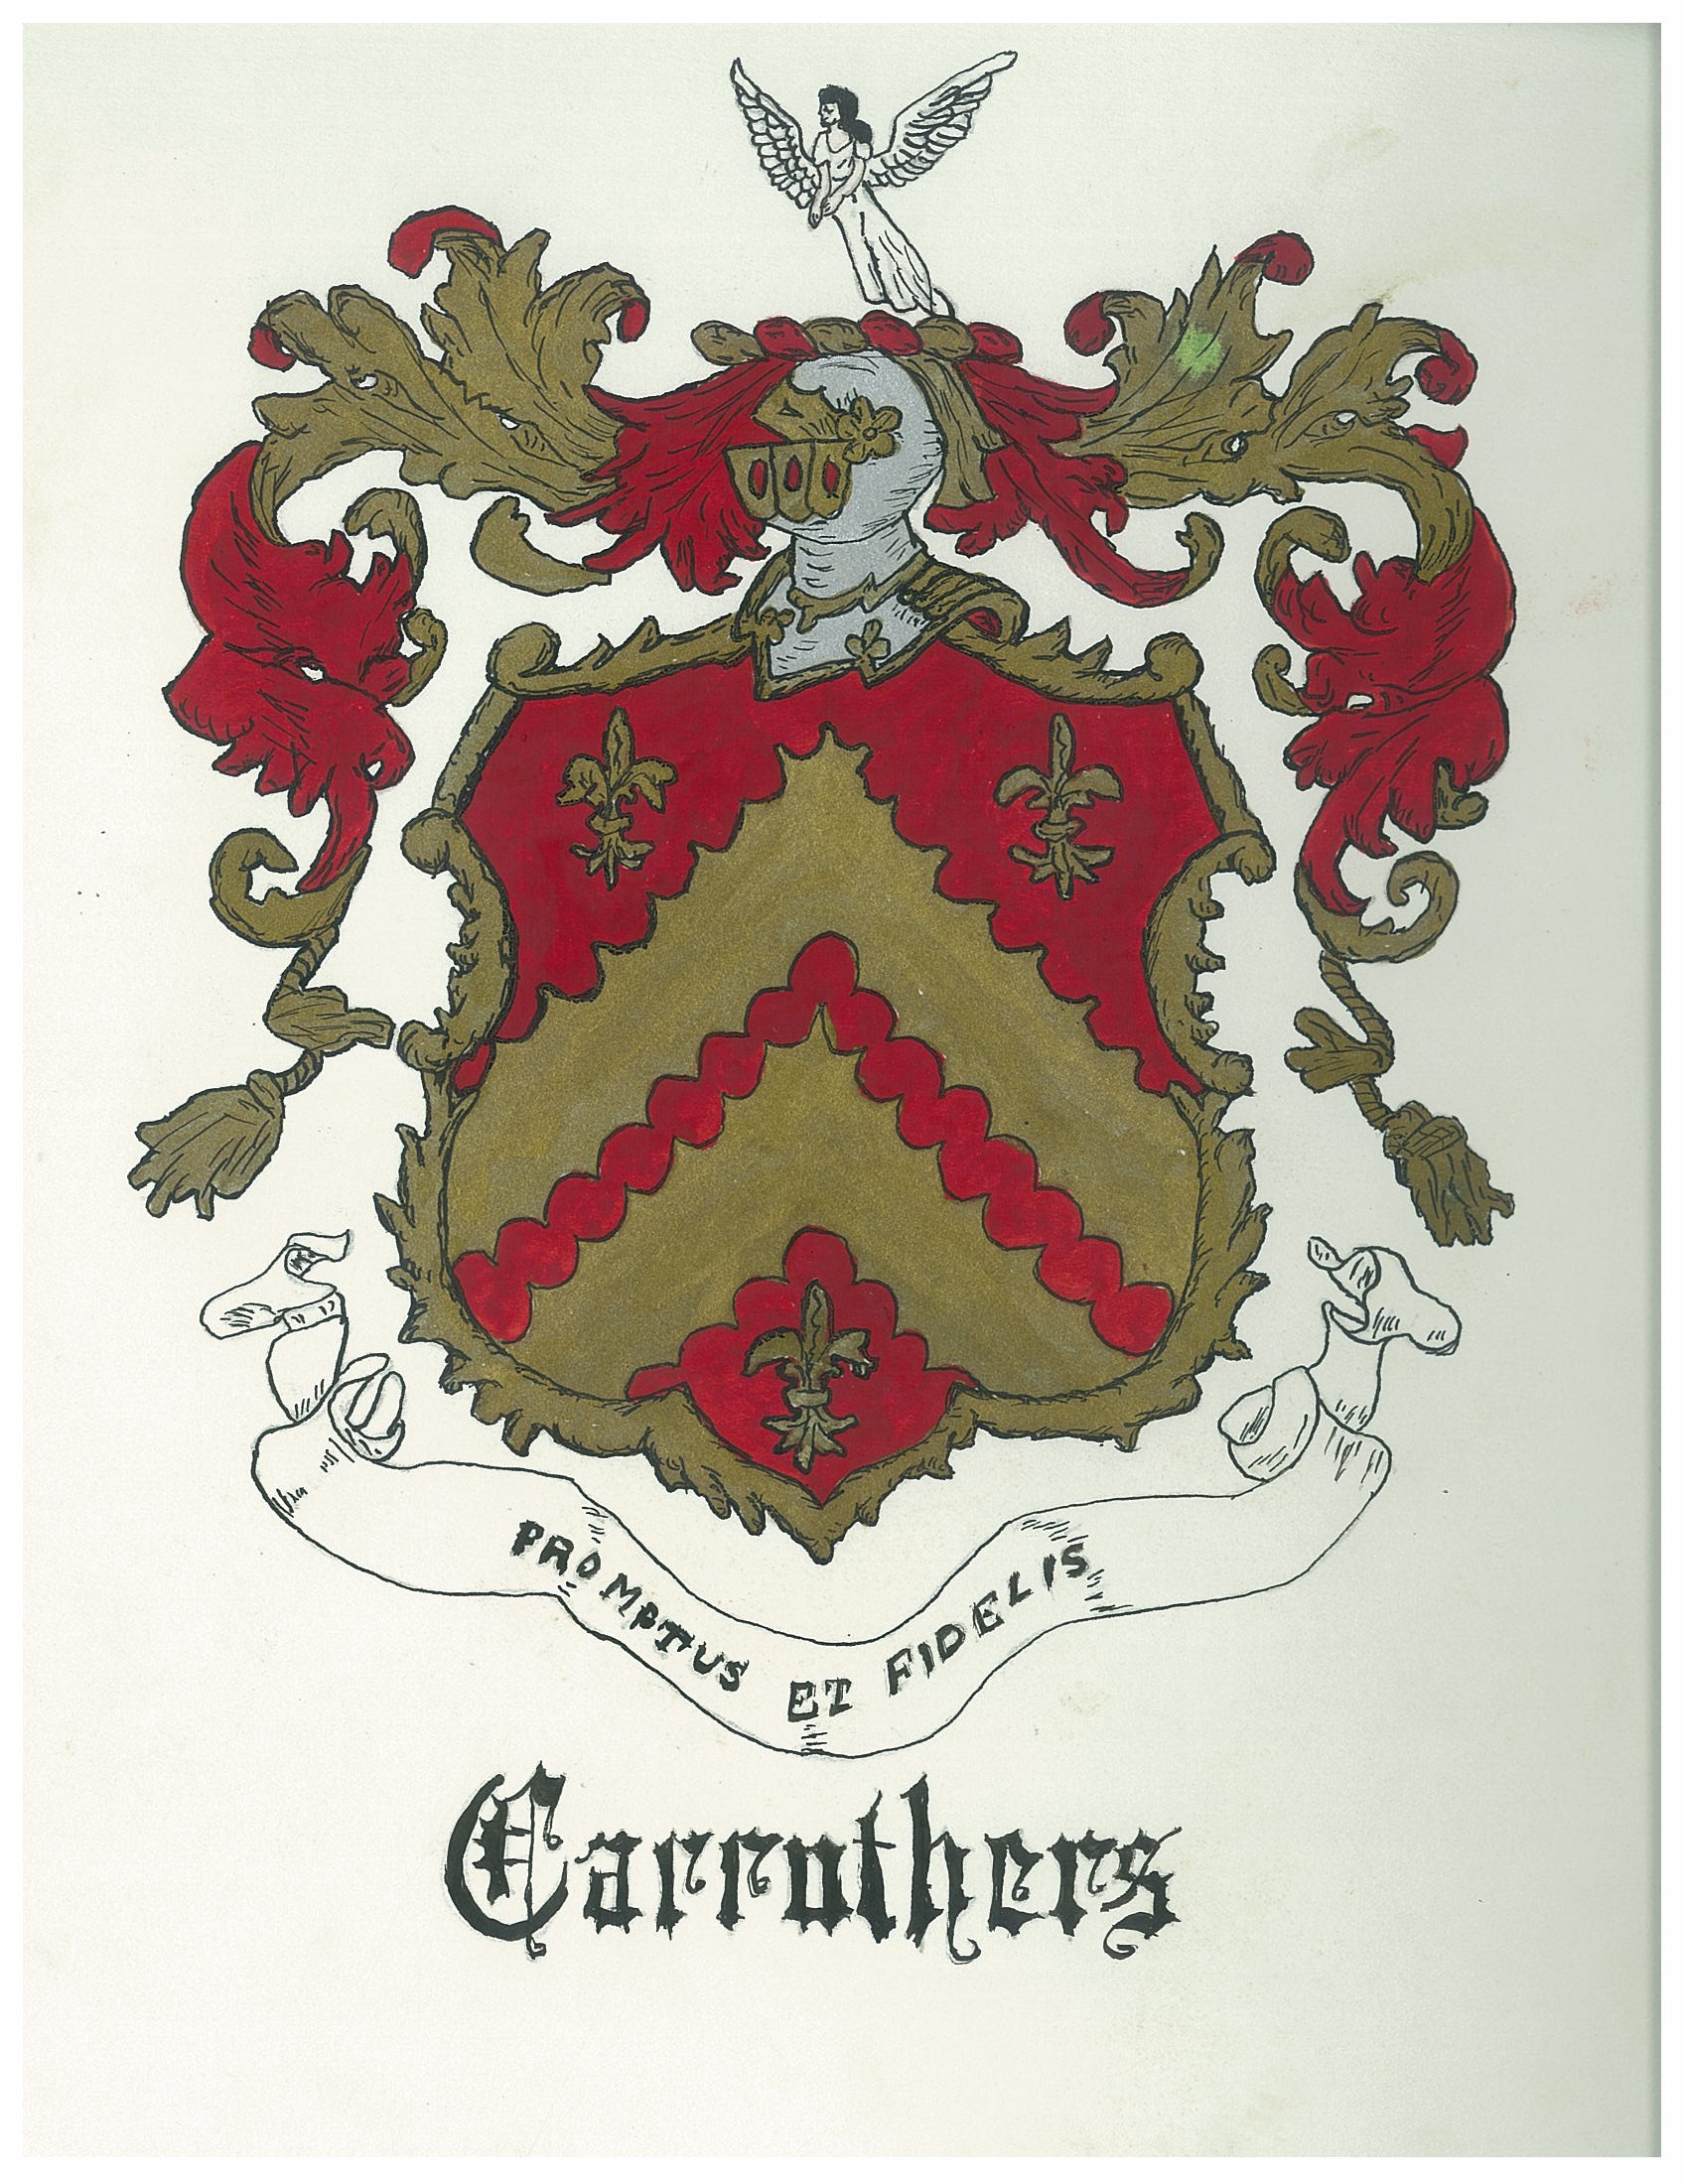 Carruthers Coat of Arms